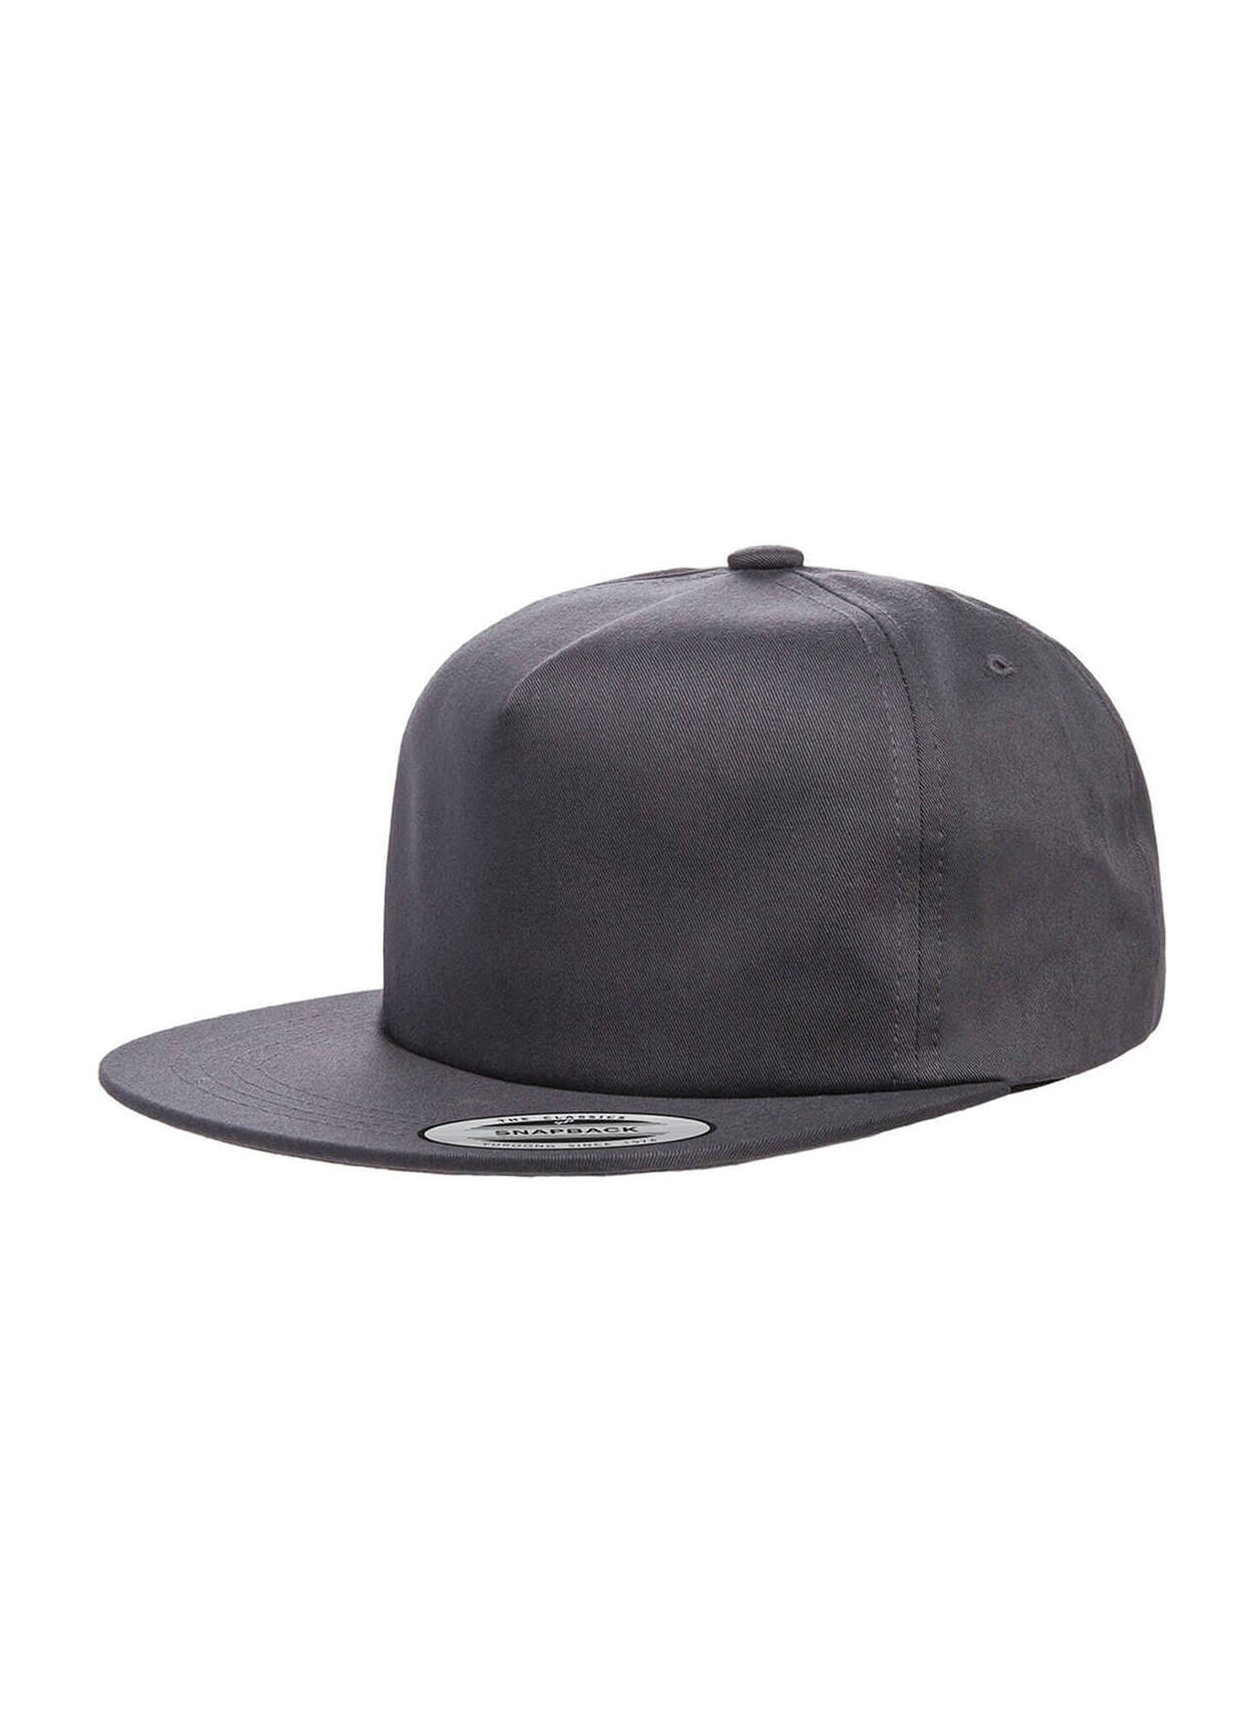 Yupoong Charcoal Unstructured 5-Panel Snapback Hat